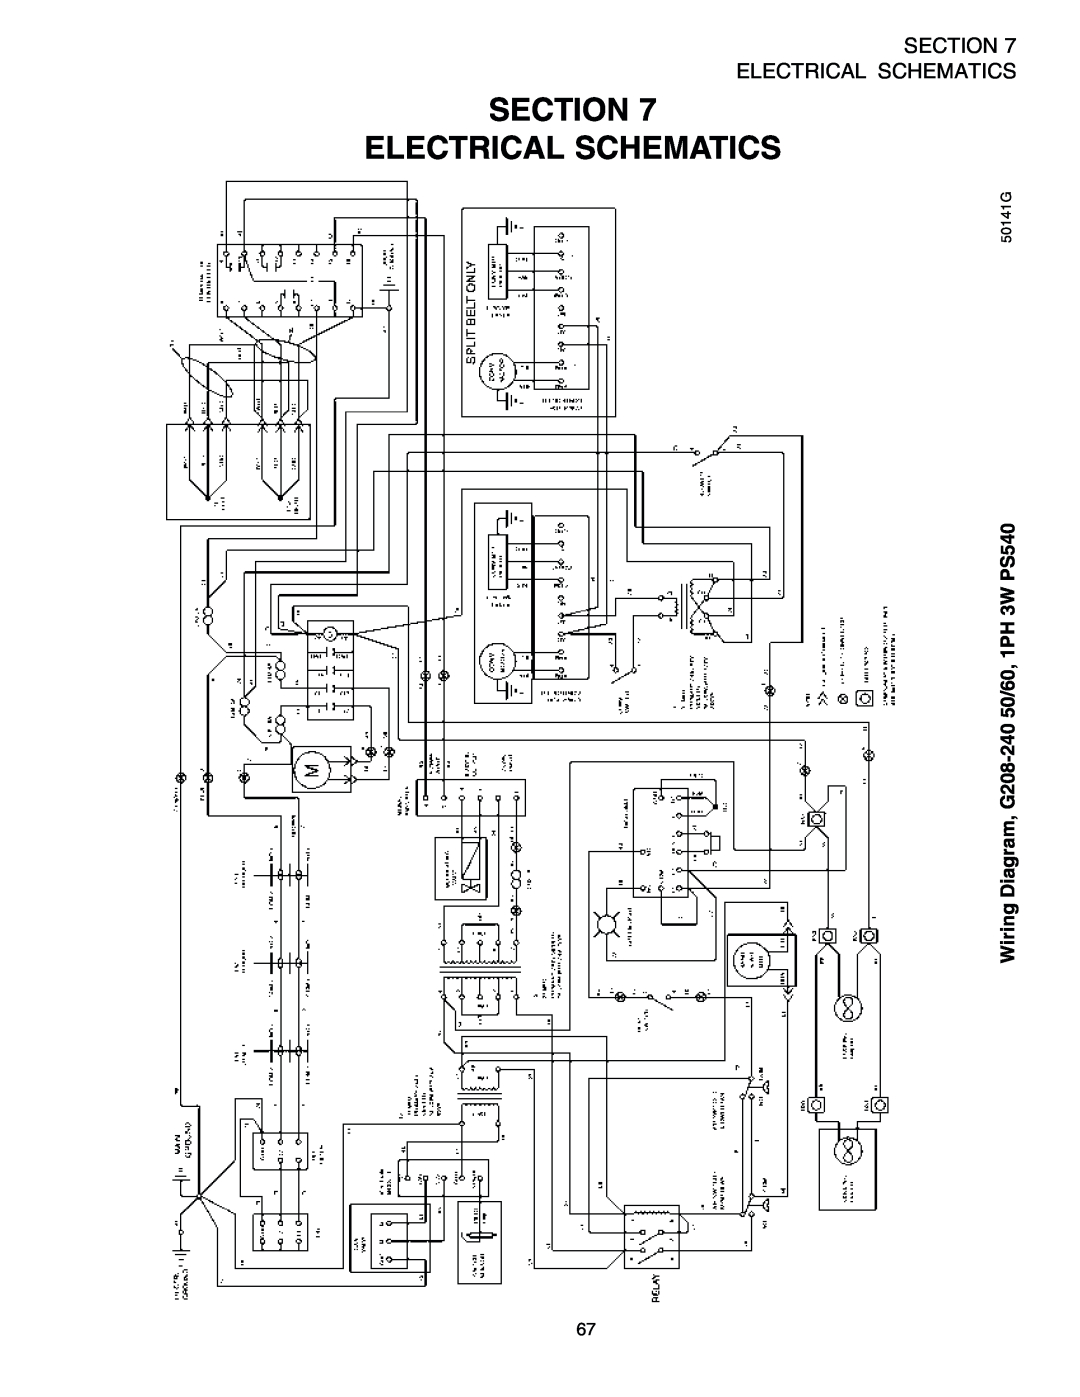 Middleby Marshall installation manual Section Electrical Schematics, Wiring Diagram, G208-24050/60, 1PH 3W PS540 